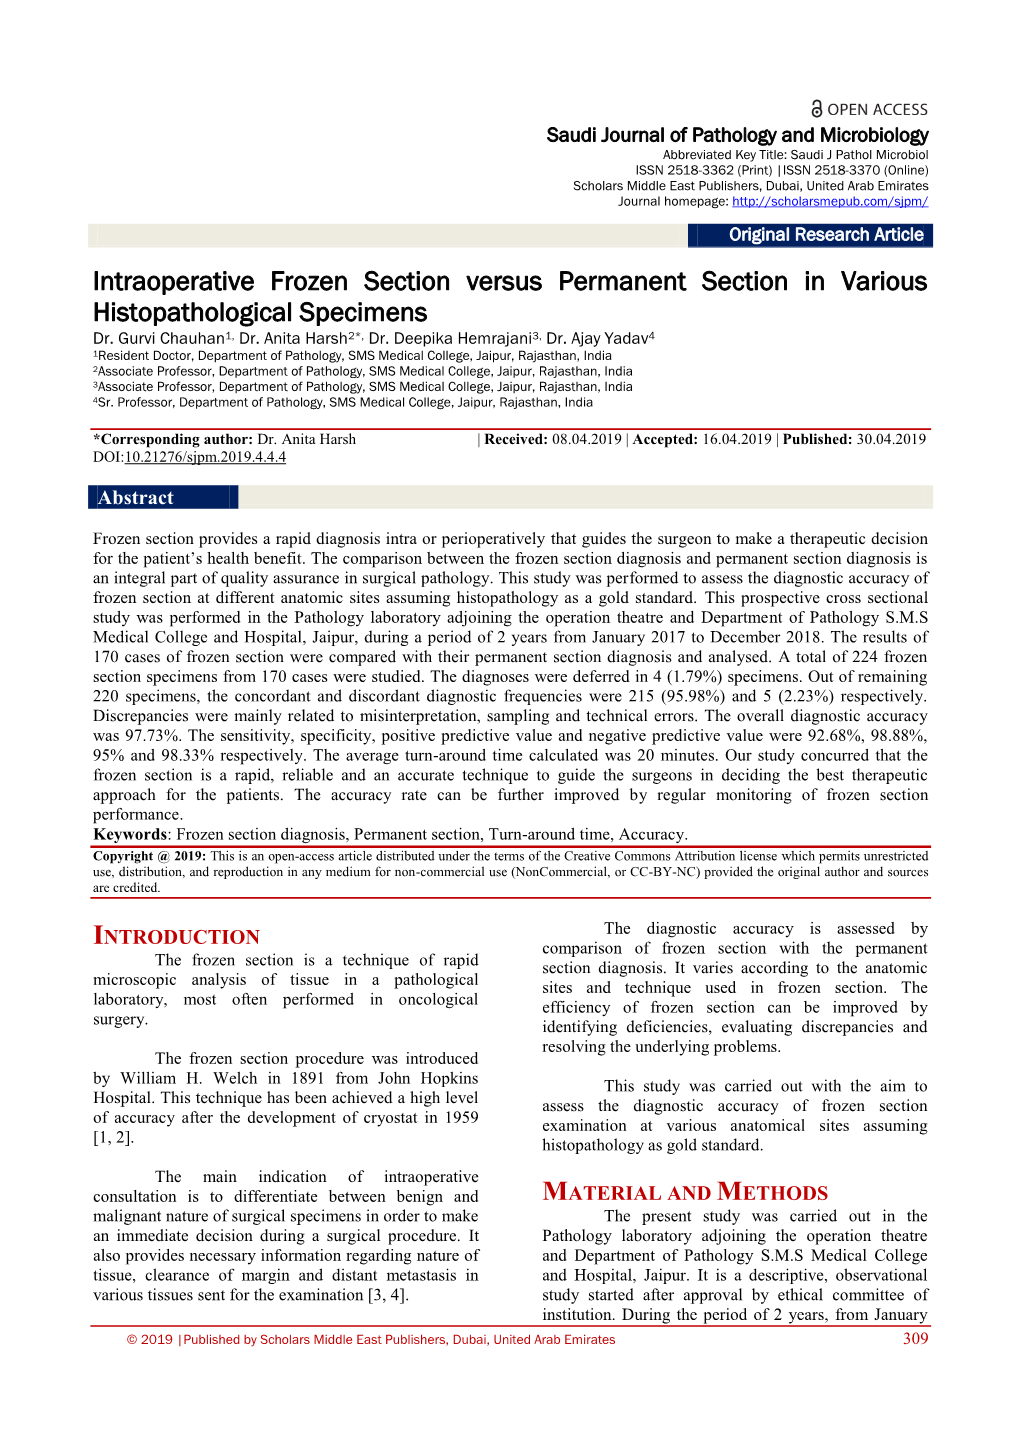 Intraoperative Frozen Section Versus Permanent Section in Various Histopathological Specimens Dr